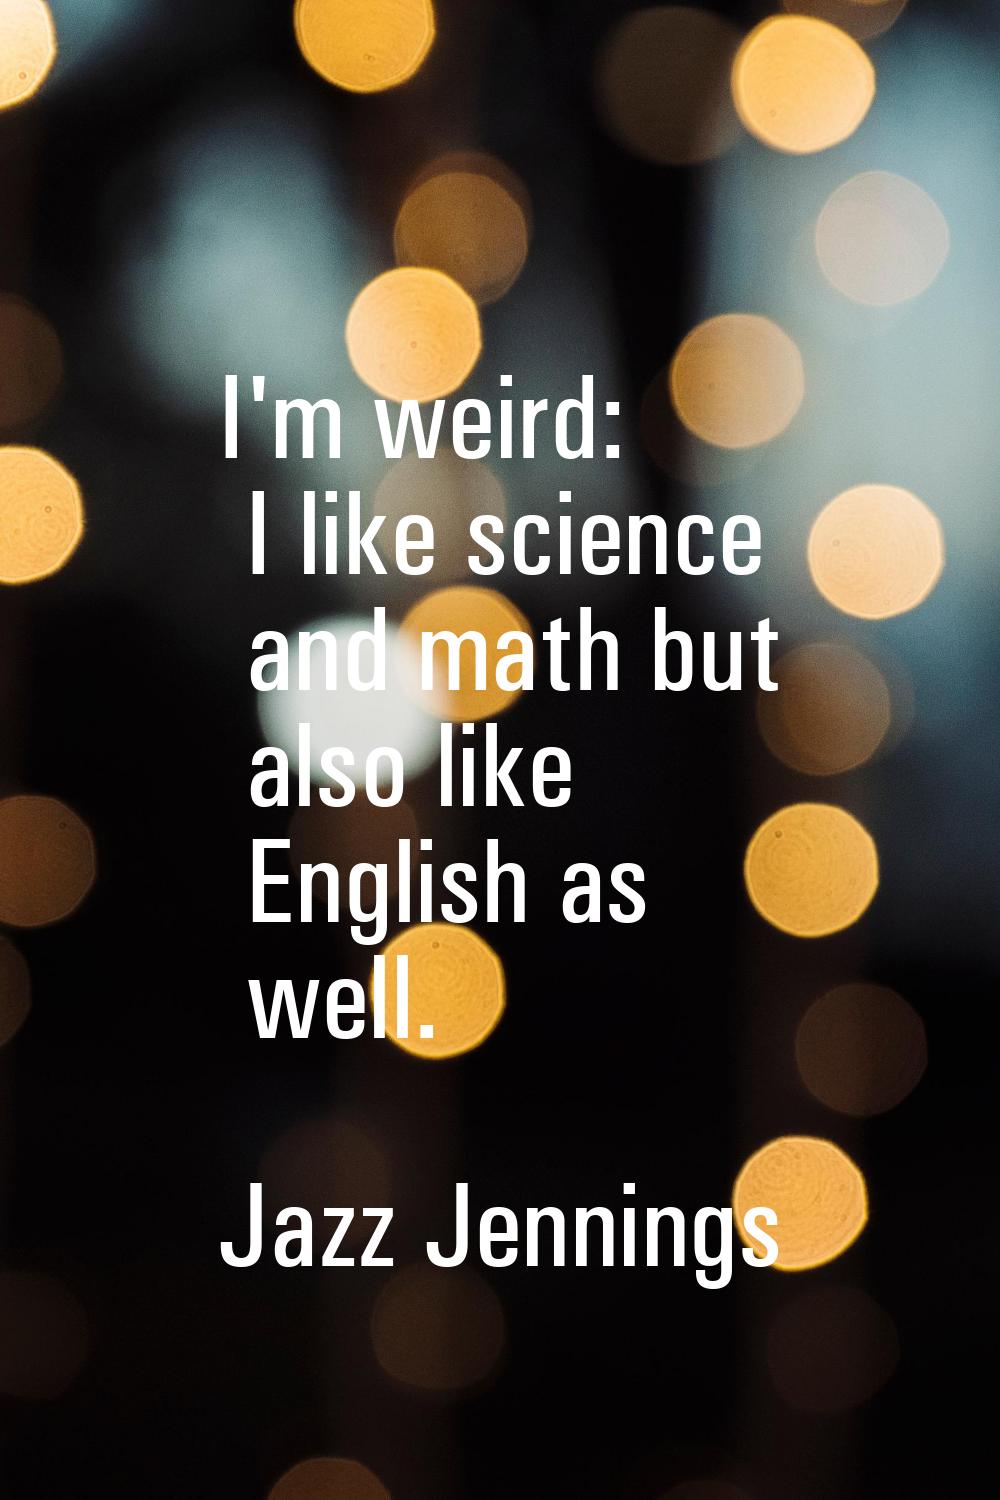 I'm weird: I like science and math but also like English as well.